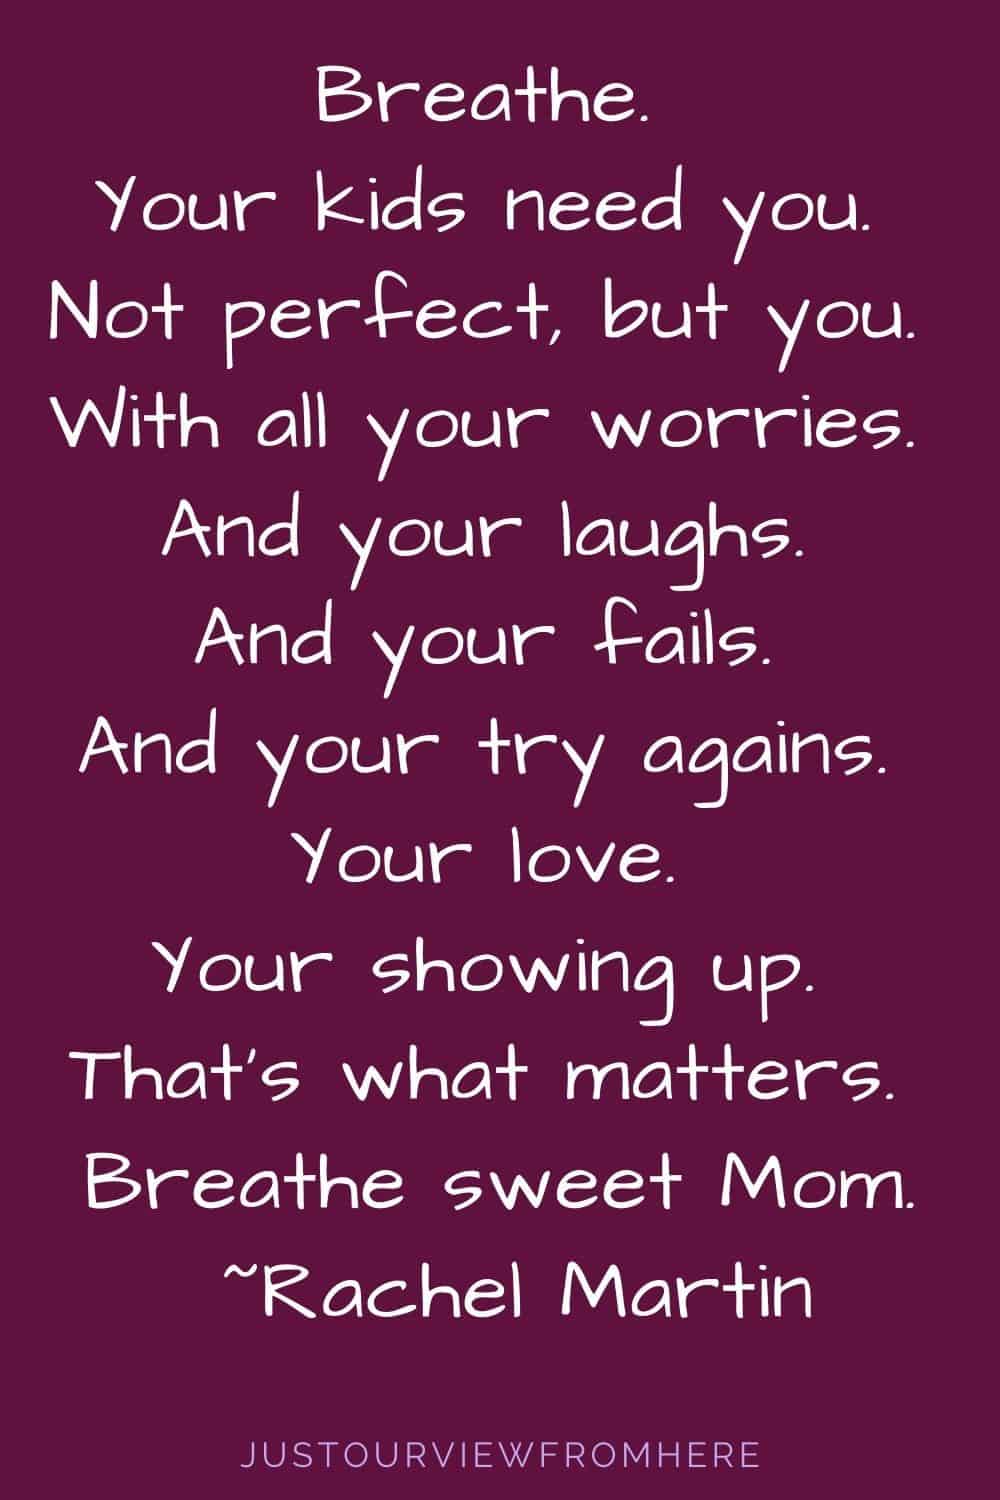 QUOTE ABOUT MOTHERHOOD. Breathe. Your kids need you. Not perfect, but you. With all your worries. And your laughs. And your fails. And your try agains. Your love. Your showing up. That’s what matters. Breathe sweet Mom.~ Rachel Martin